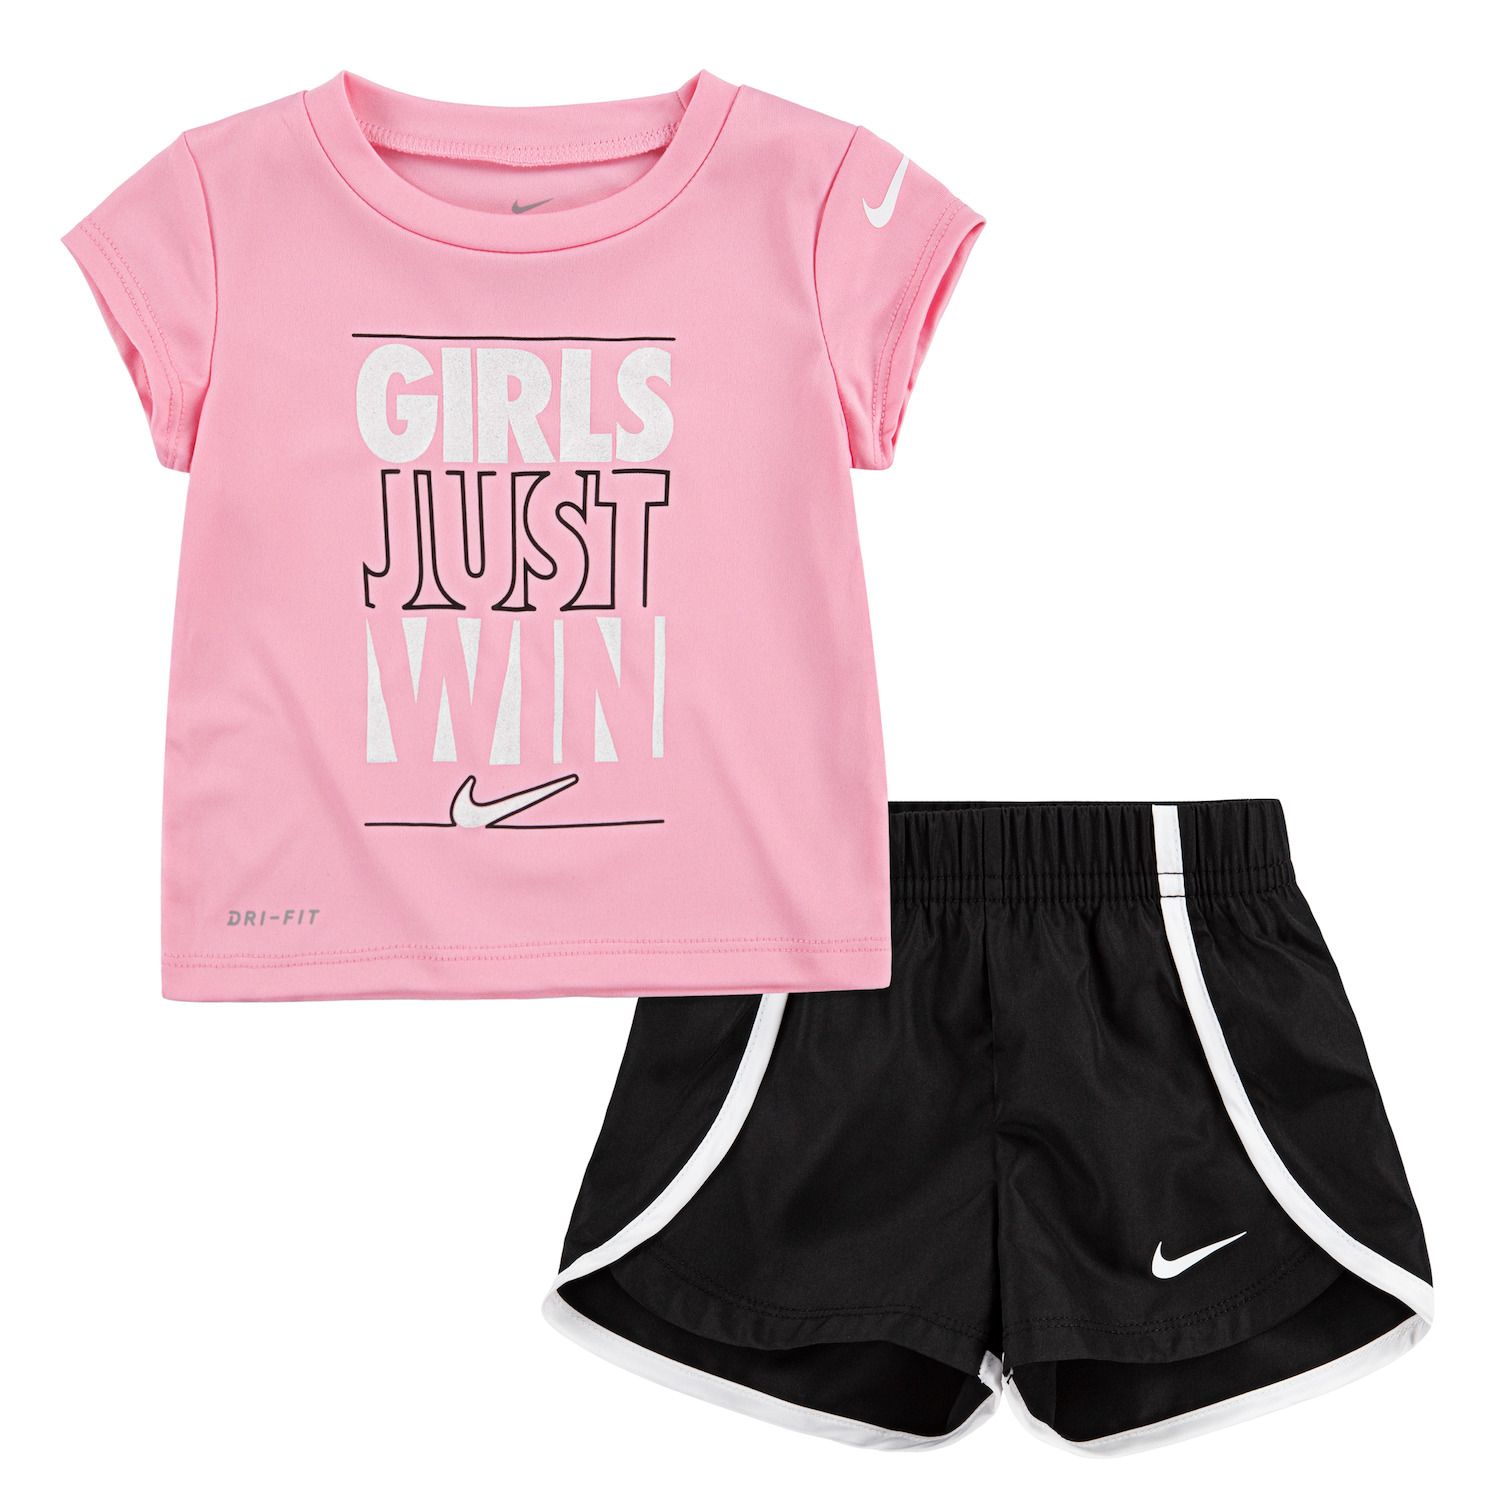 18 month nike outfits